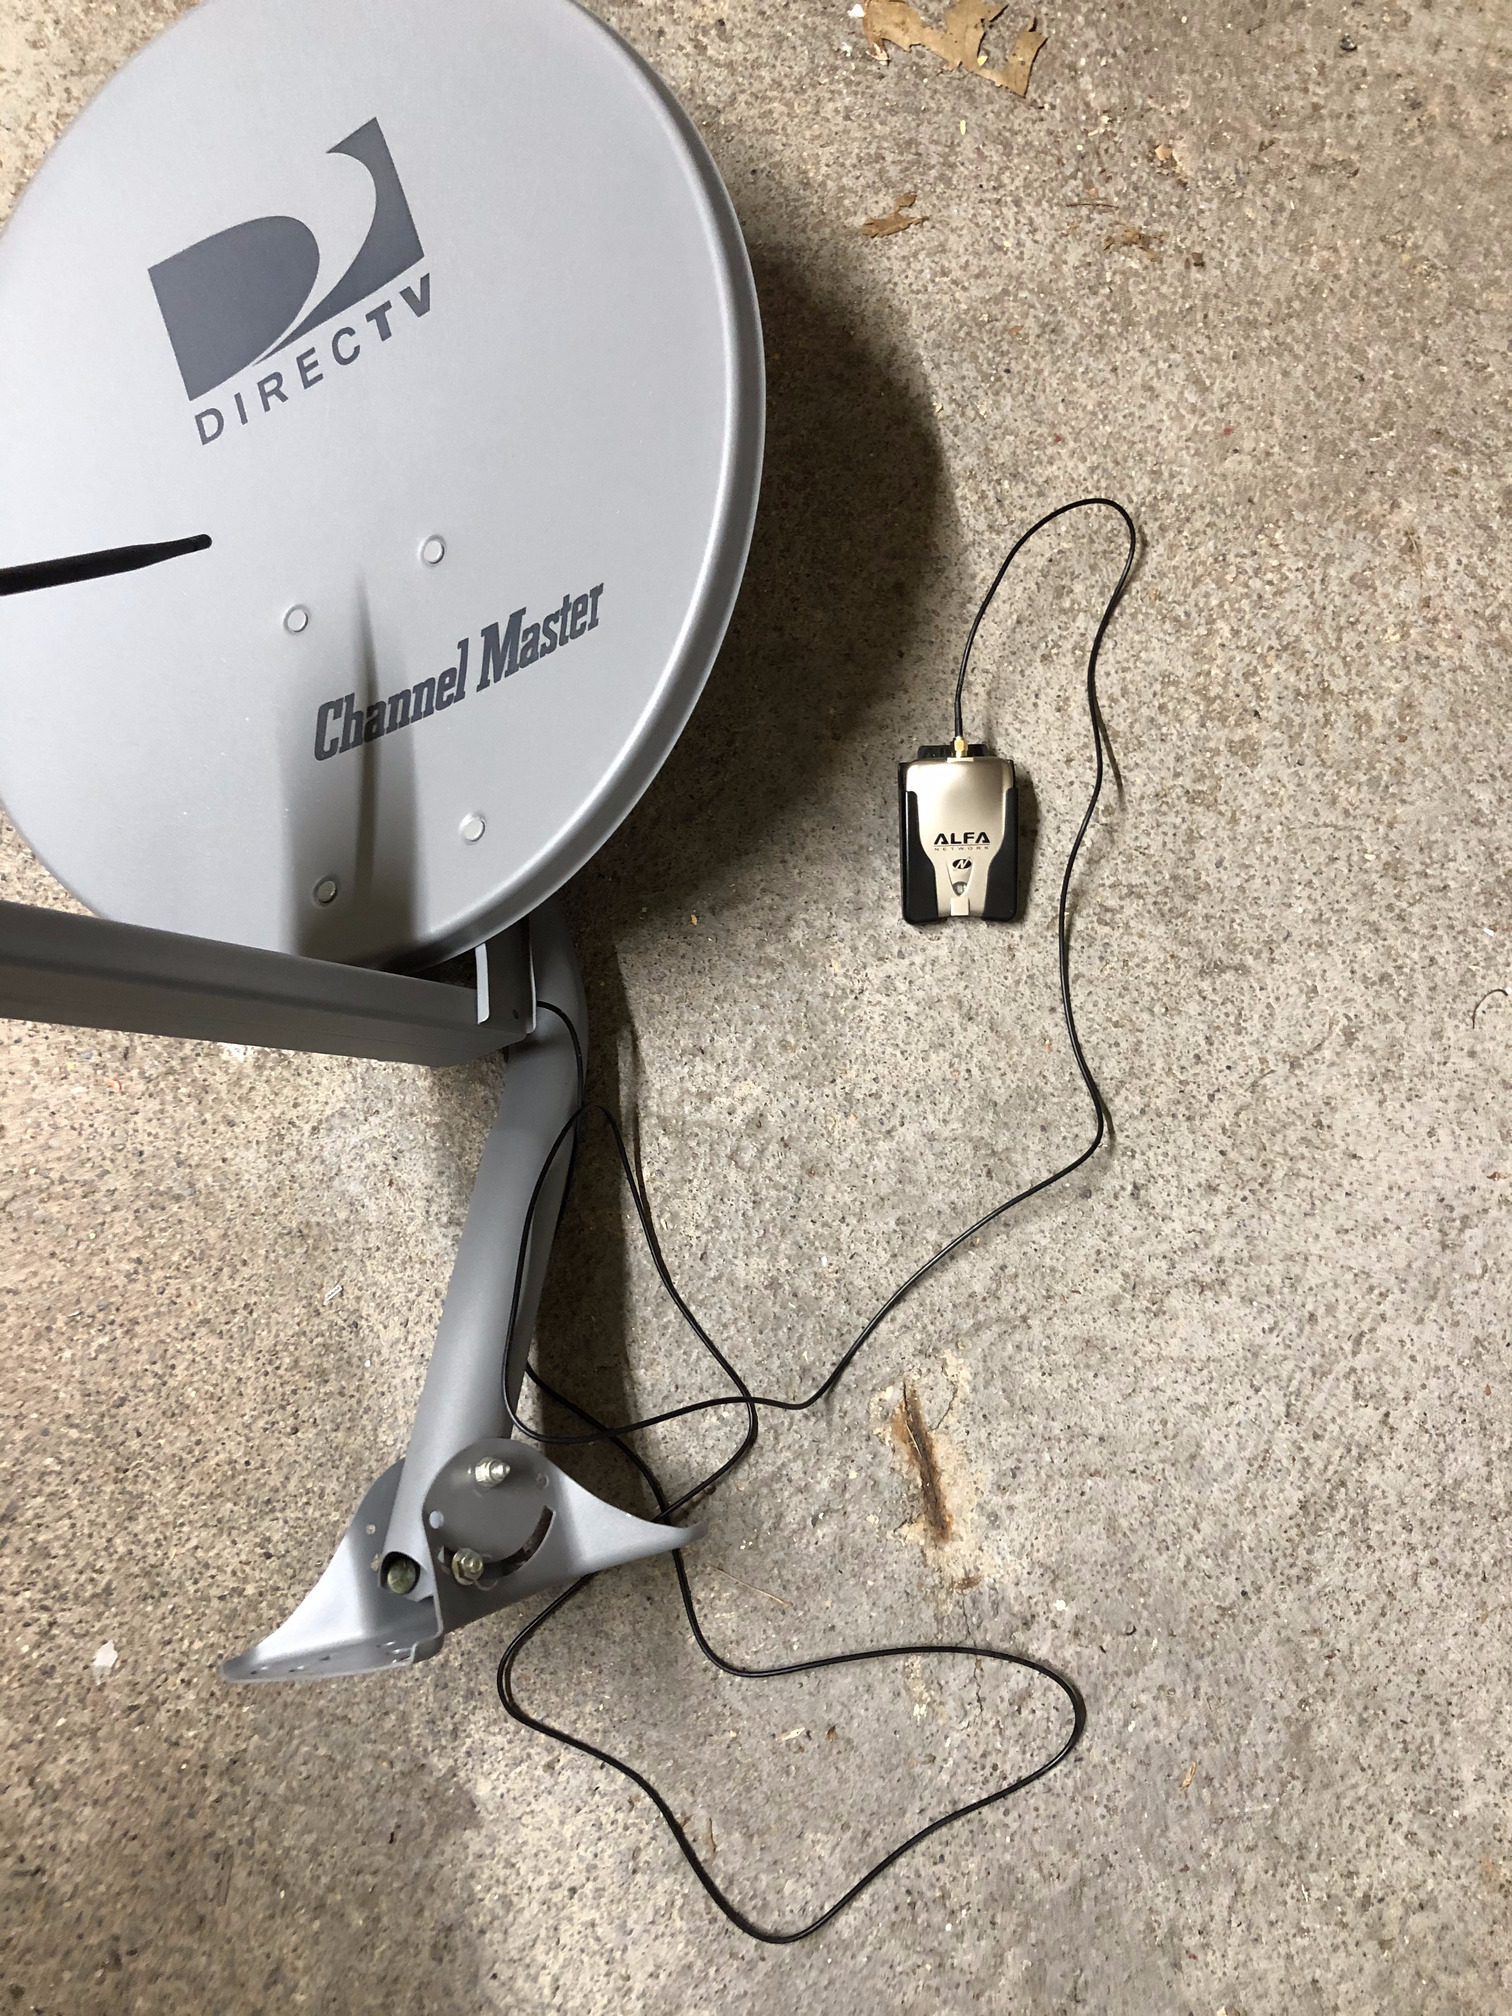 Figure 22. Satellite dish with the WiFi dongle attached